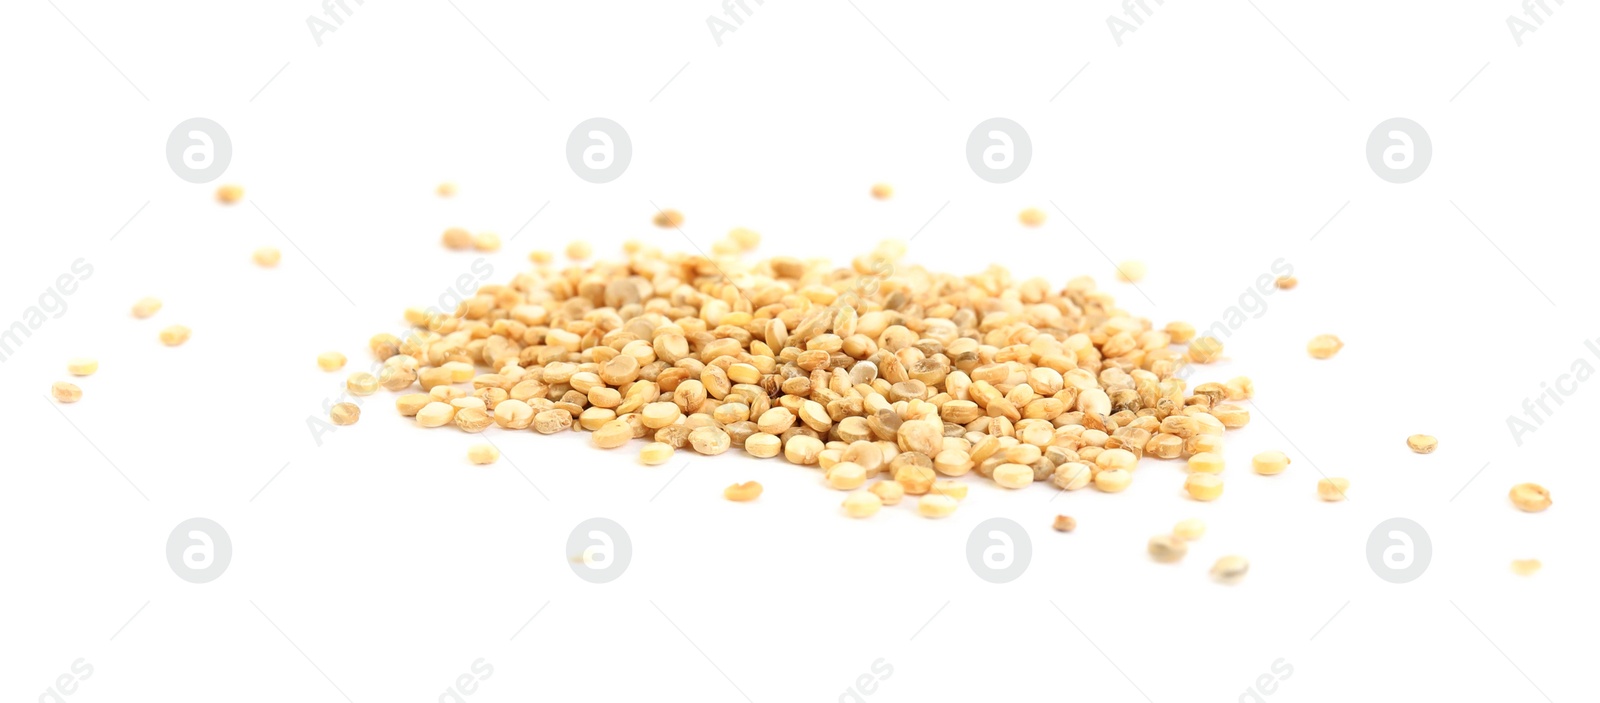 Photo of Pile of raw quinoa grains on white background